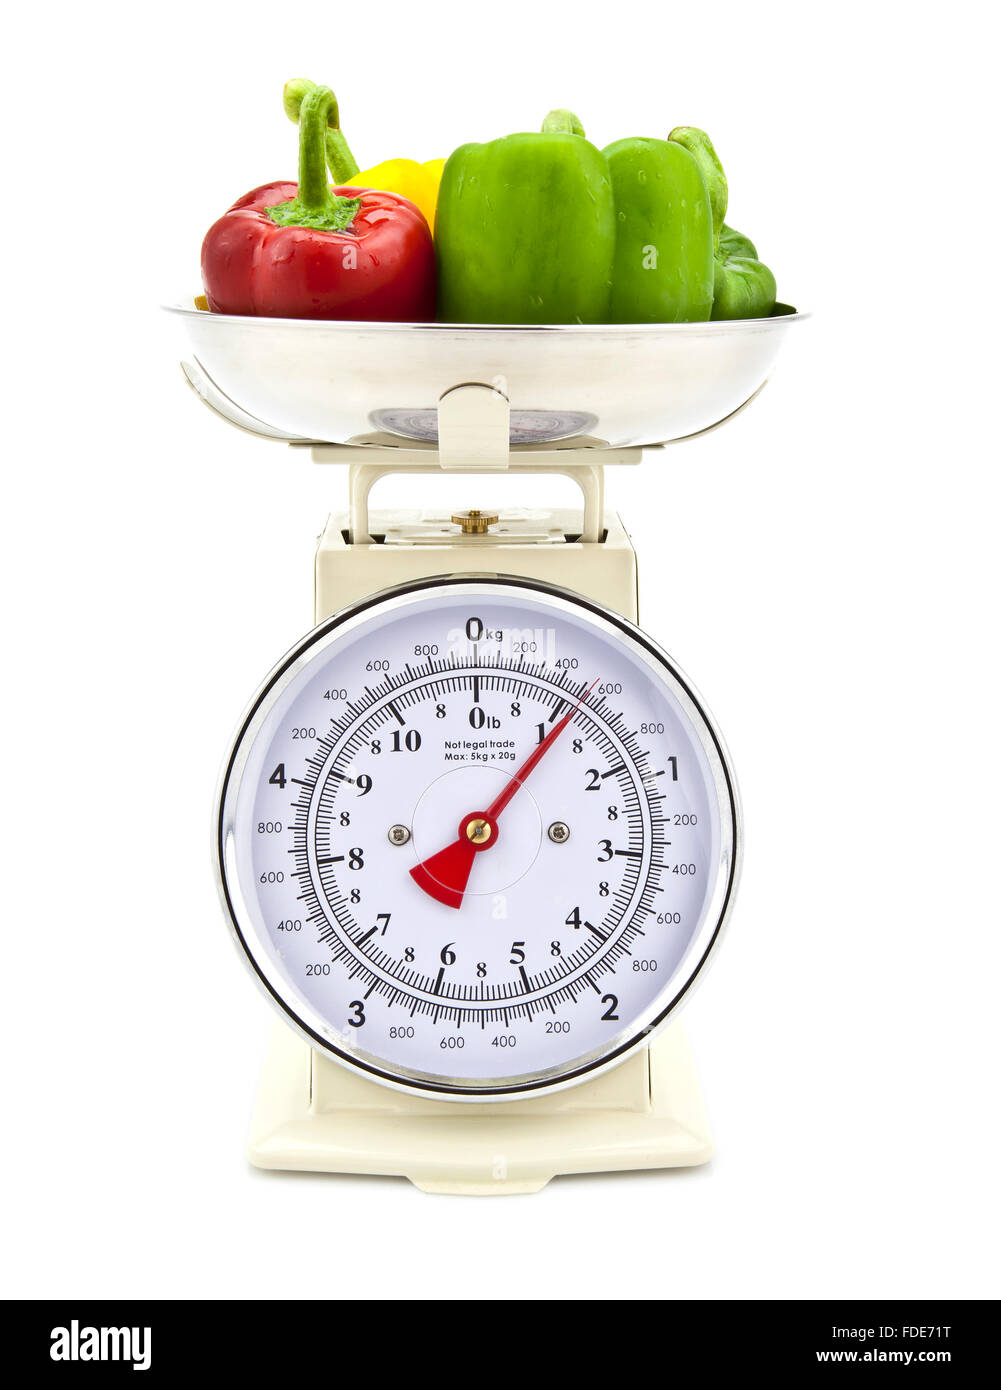 https://c8.alamy.com/comp/FDE71T/old-style-kitchen-scales-with-pepper-on-white-background-isolated-FDE71T.jpg